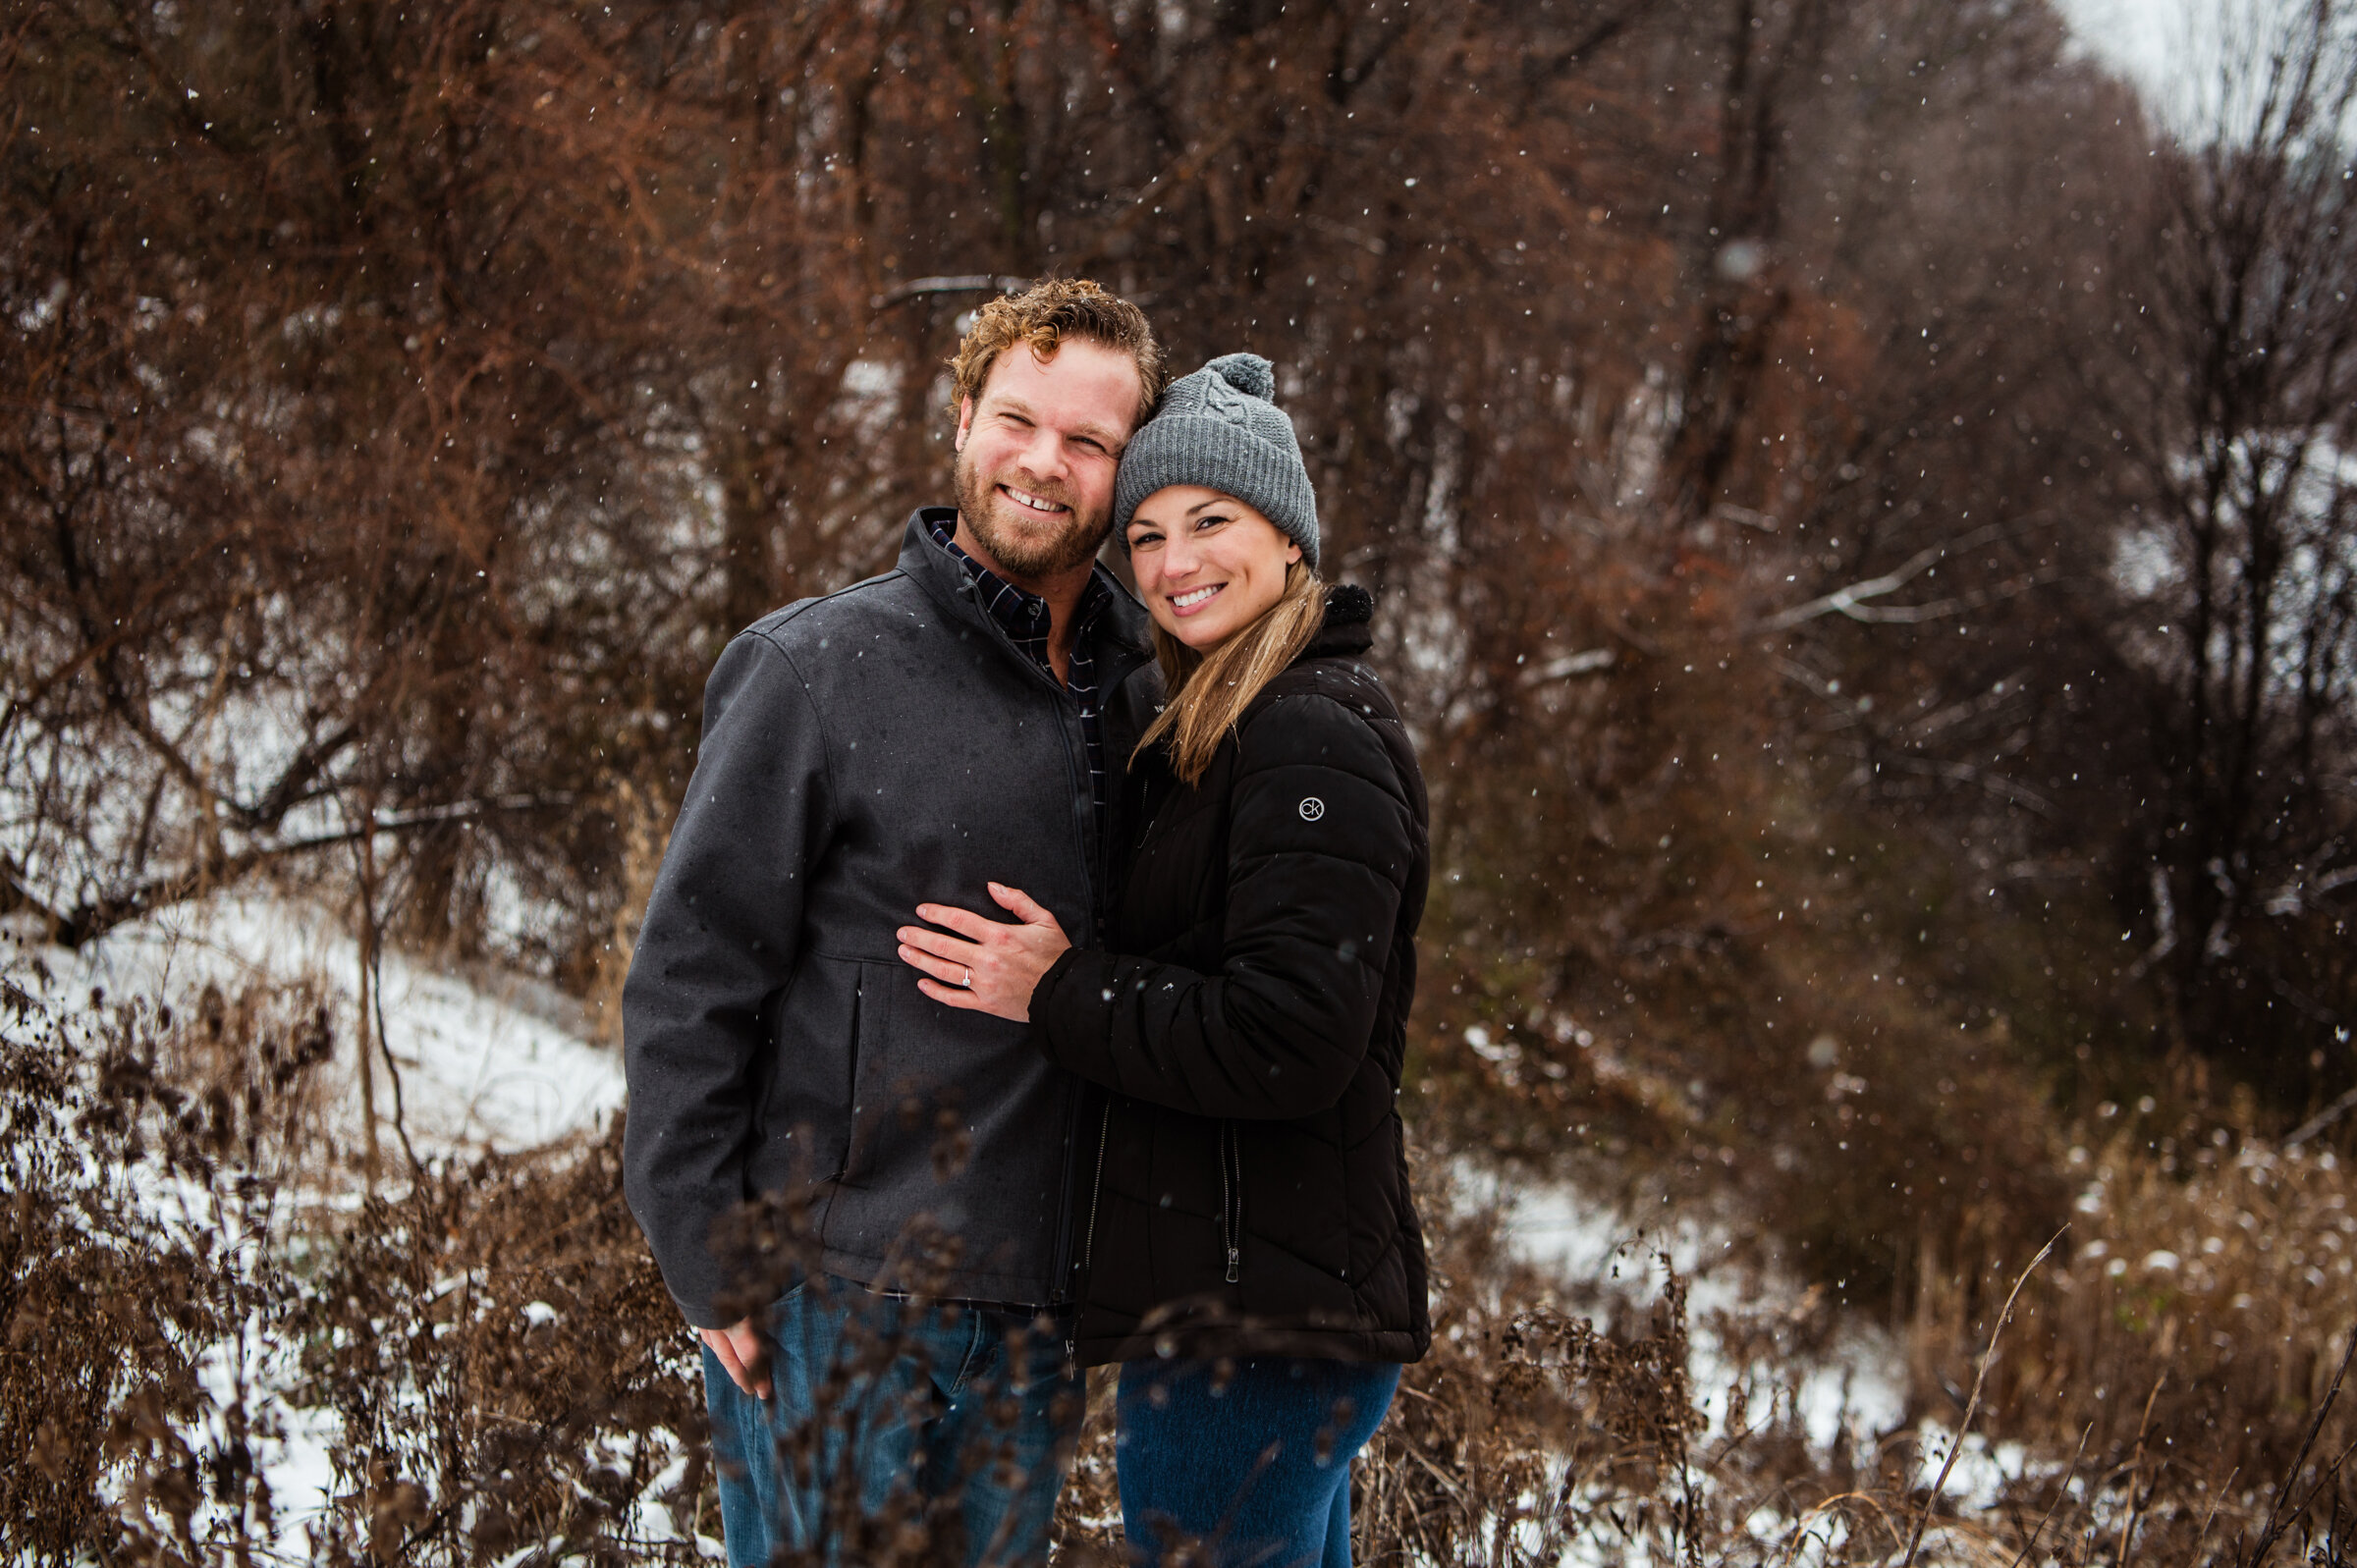 Irondequoit_Beer_Company_Durand_Eastman_Park_Rochester_Engagement_Session_JILL_STUDIO_Rochester_NY_Photographer_7230.jpg